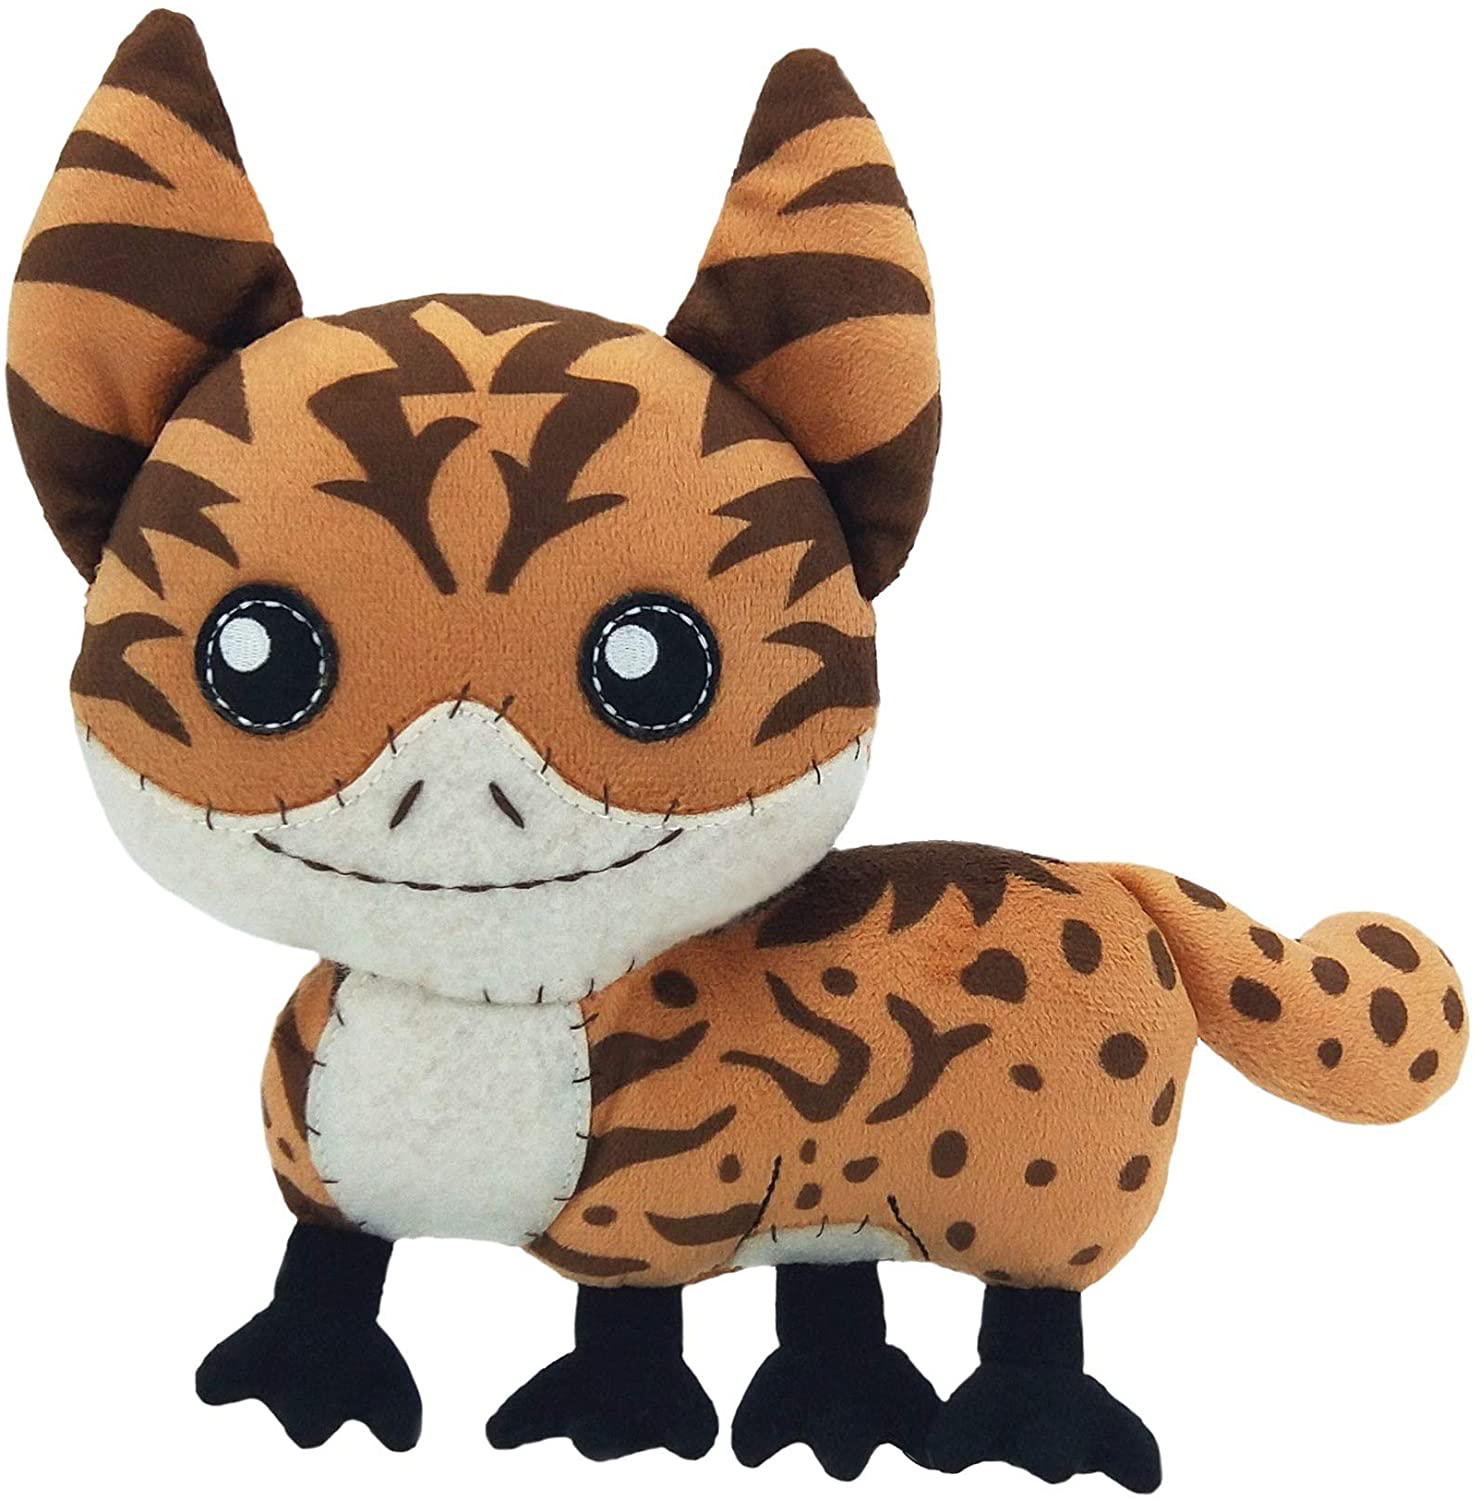 New Galaxy's Edge Loth Cat Plush Toy available now! The Force Awakens